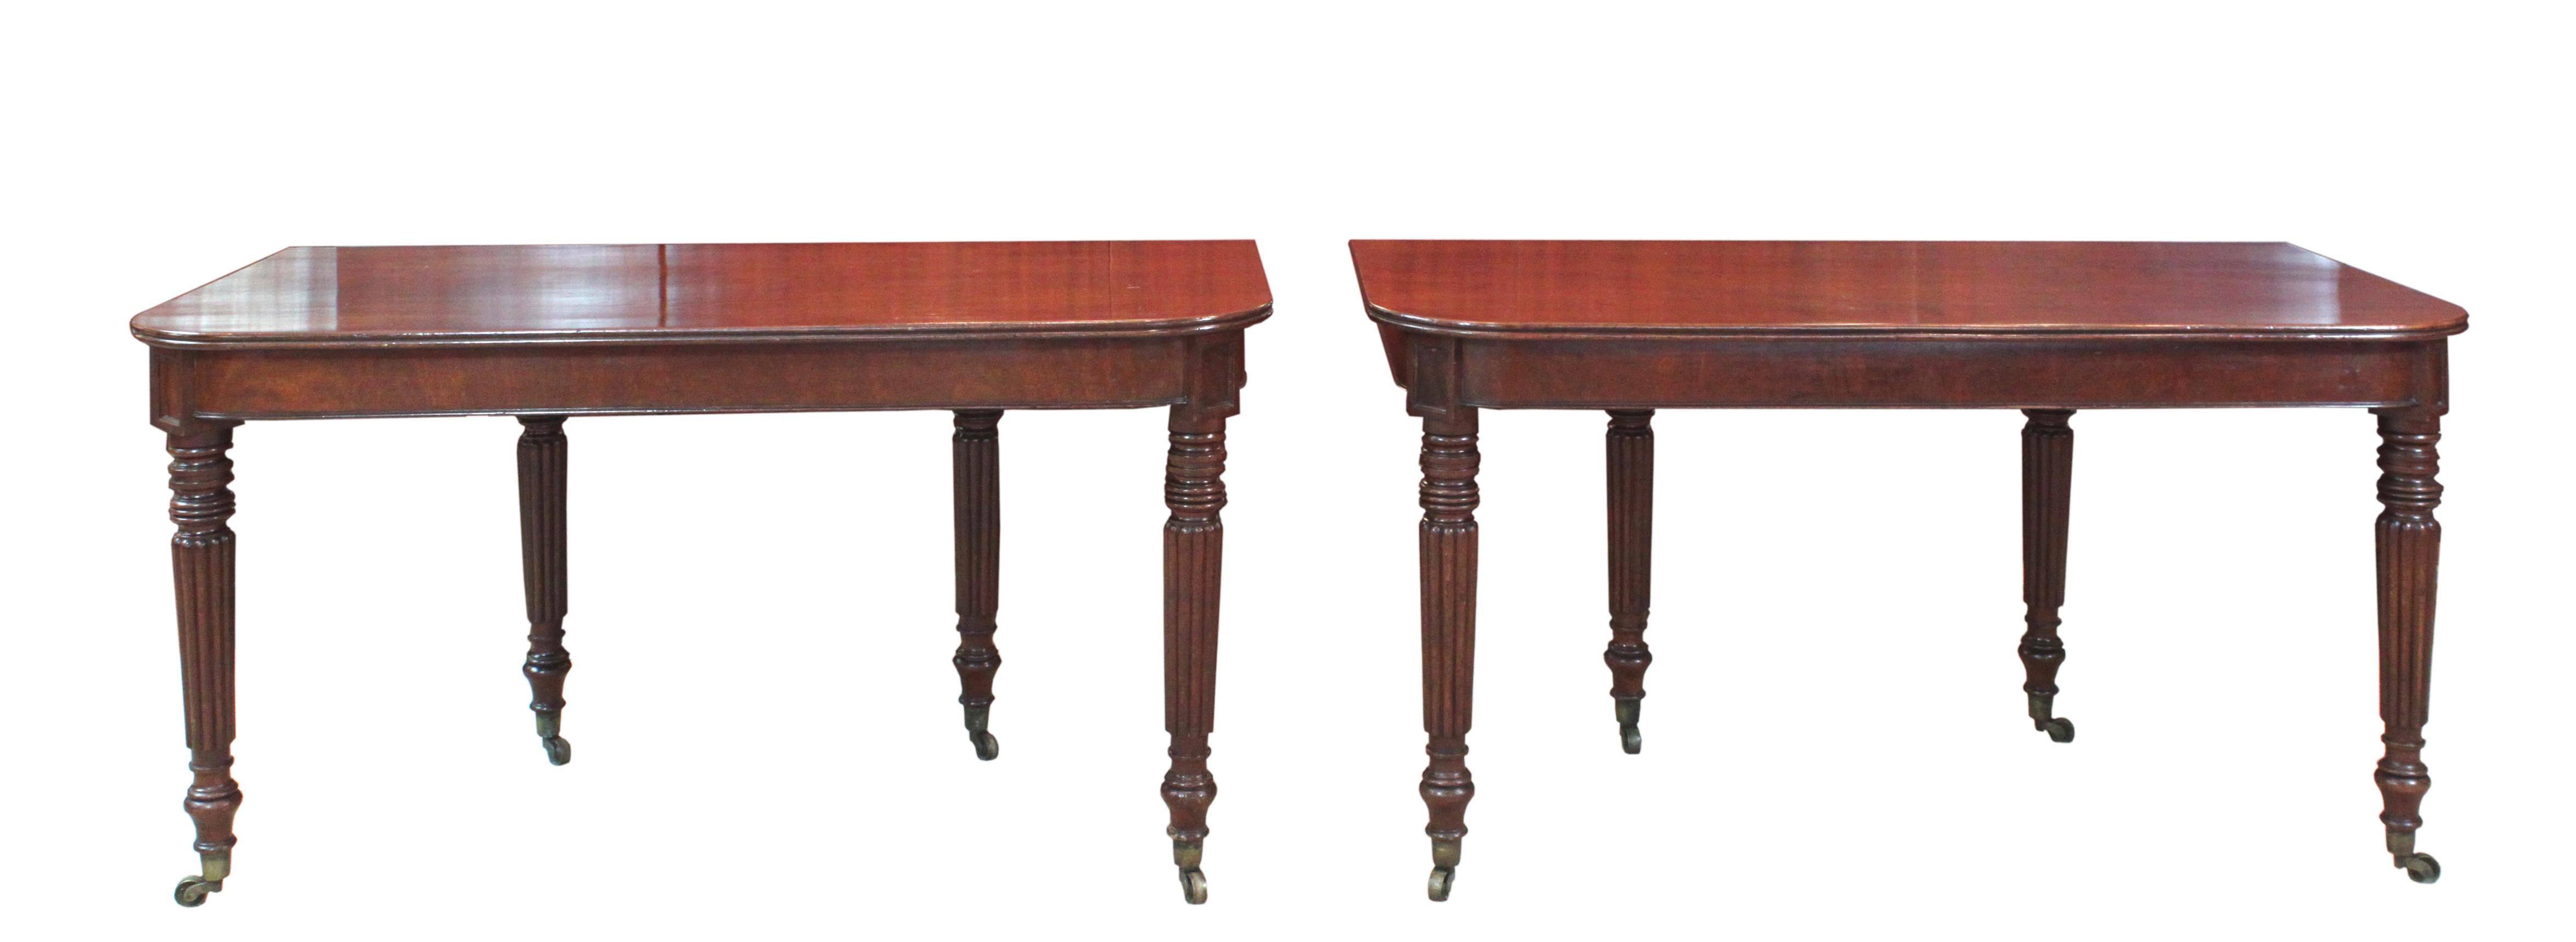 Regency Mahogany Extending Dining Table Attributed to Gillows of Lancaster For Sale 2